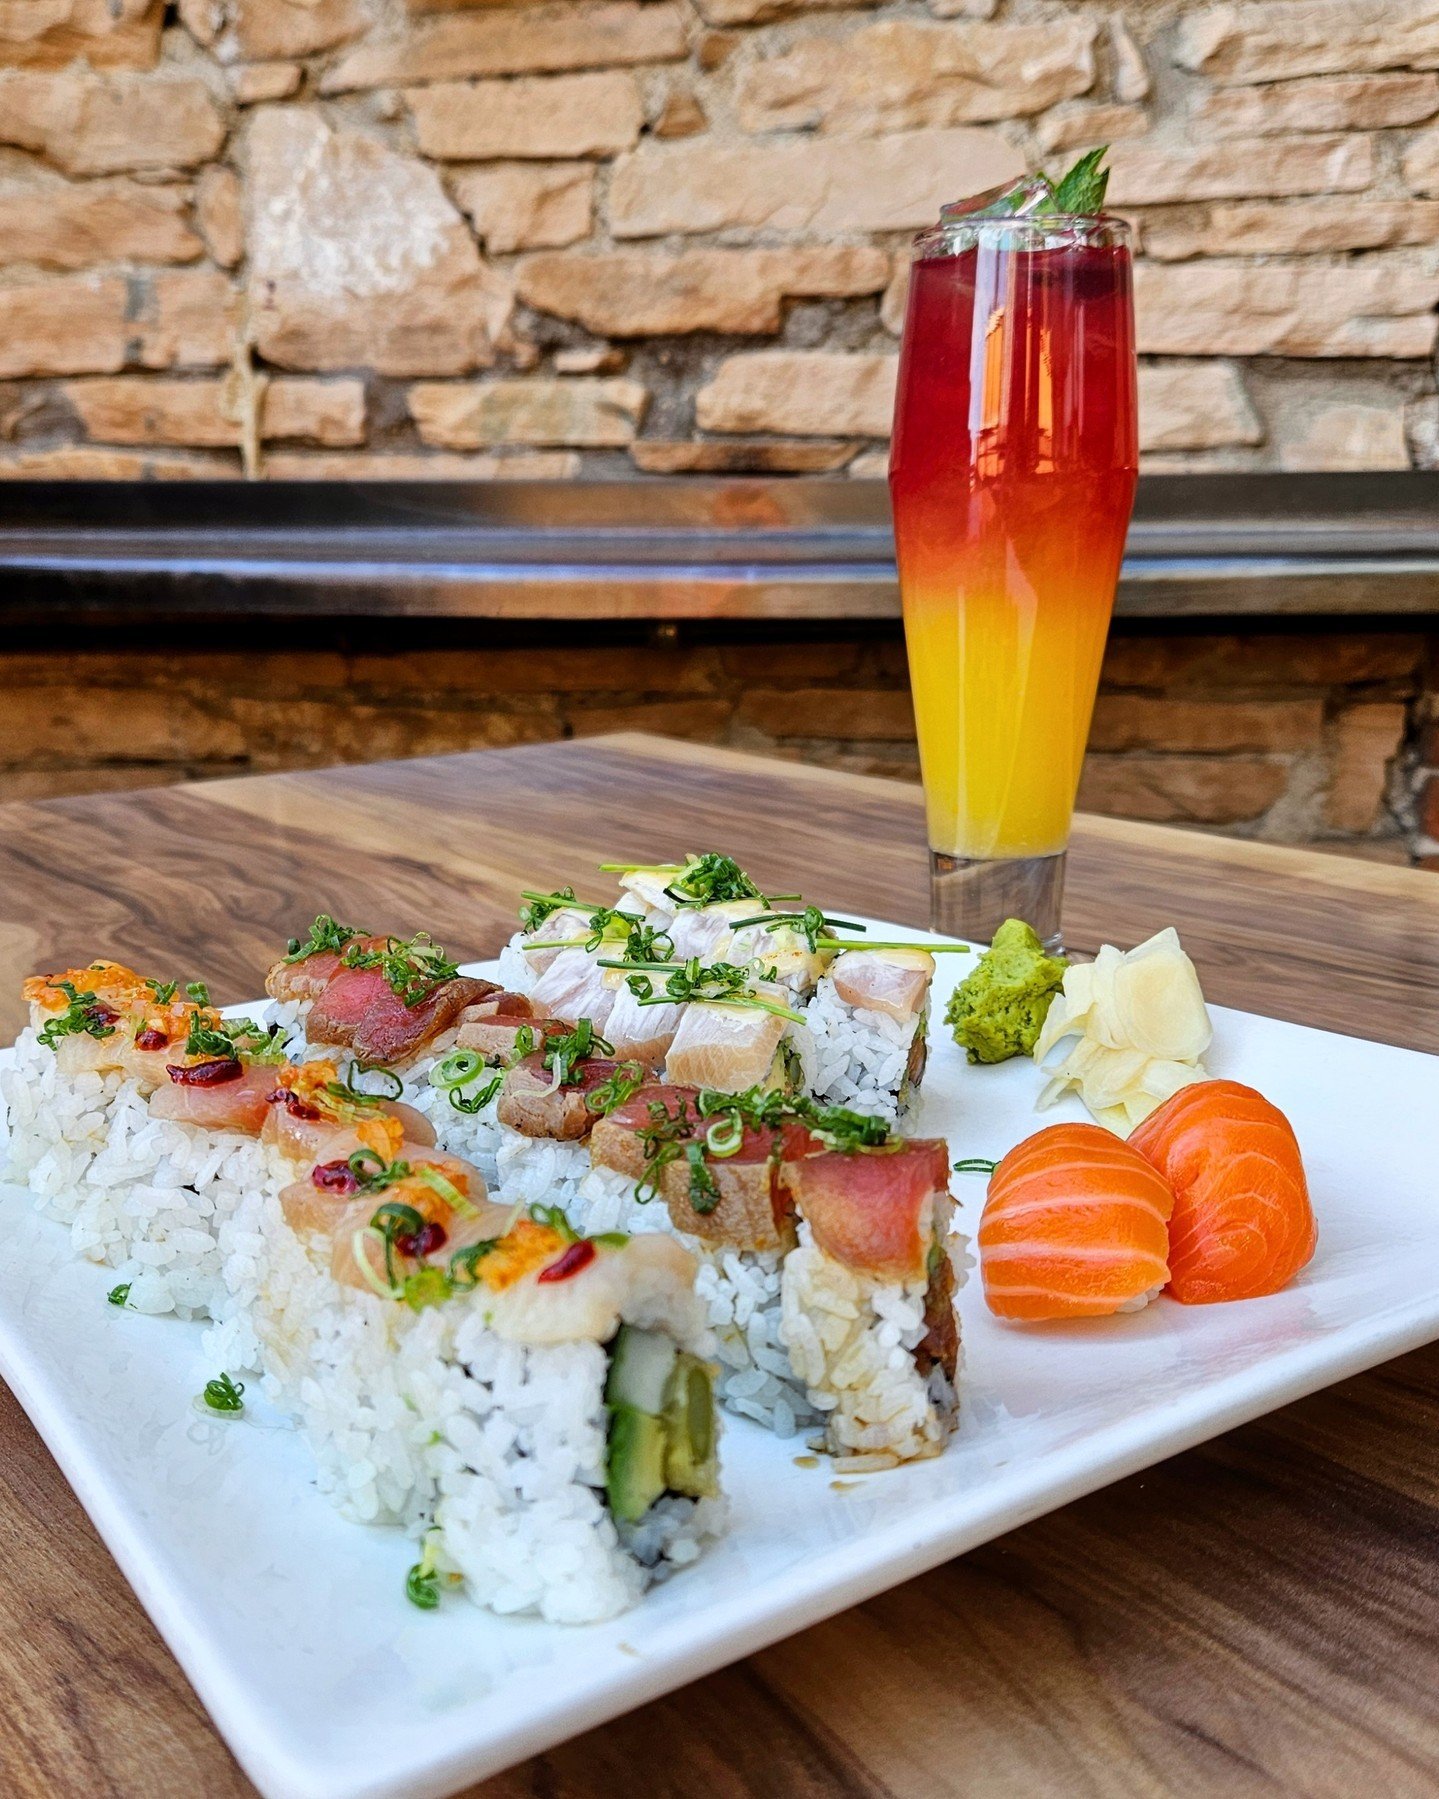 We firmly believe there's no wrong way to pair a drink with your sushi, but this matching color palette certainly wins some extra style points! 🎨